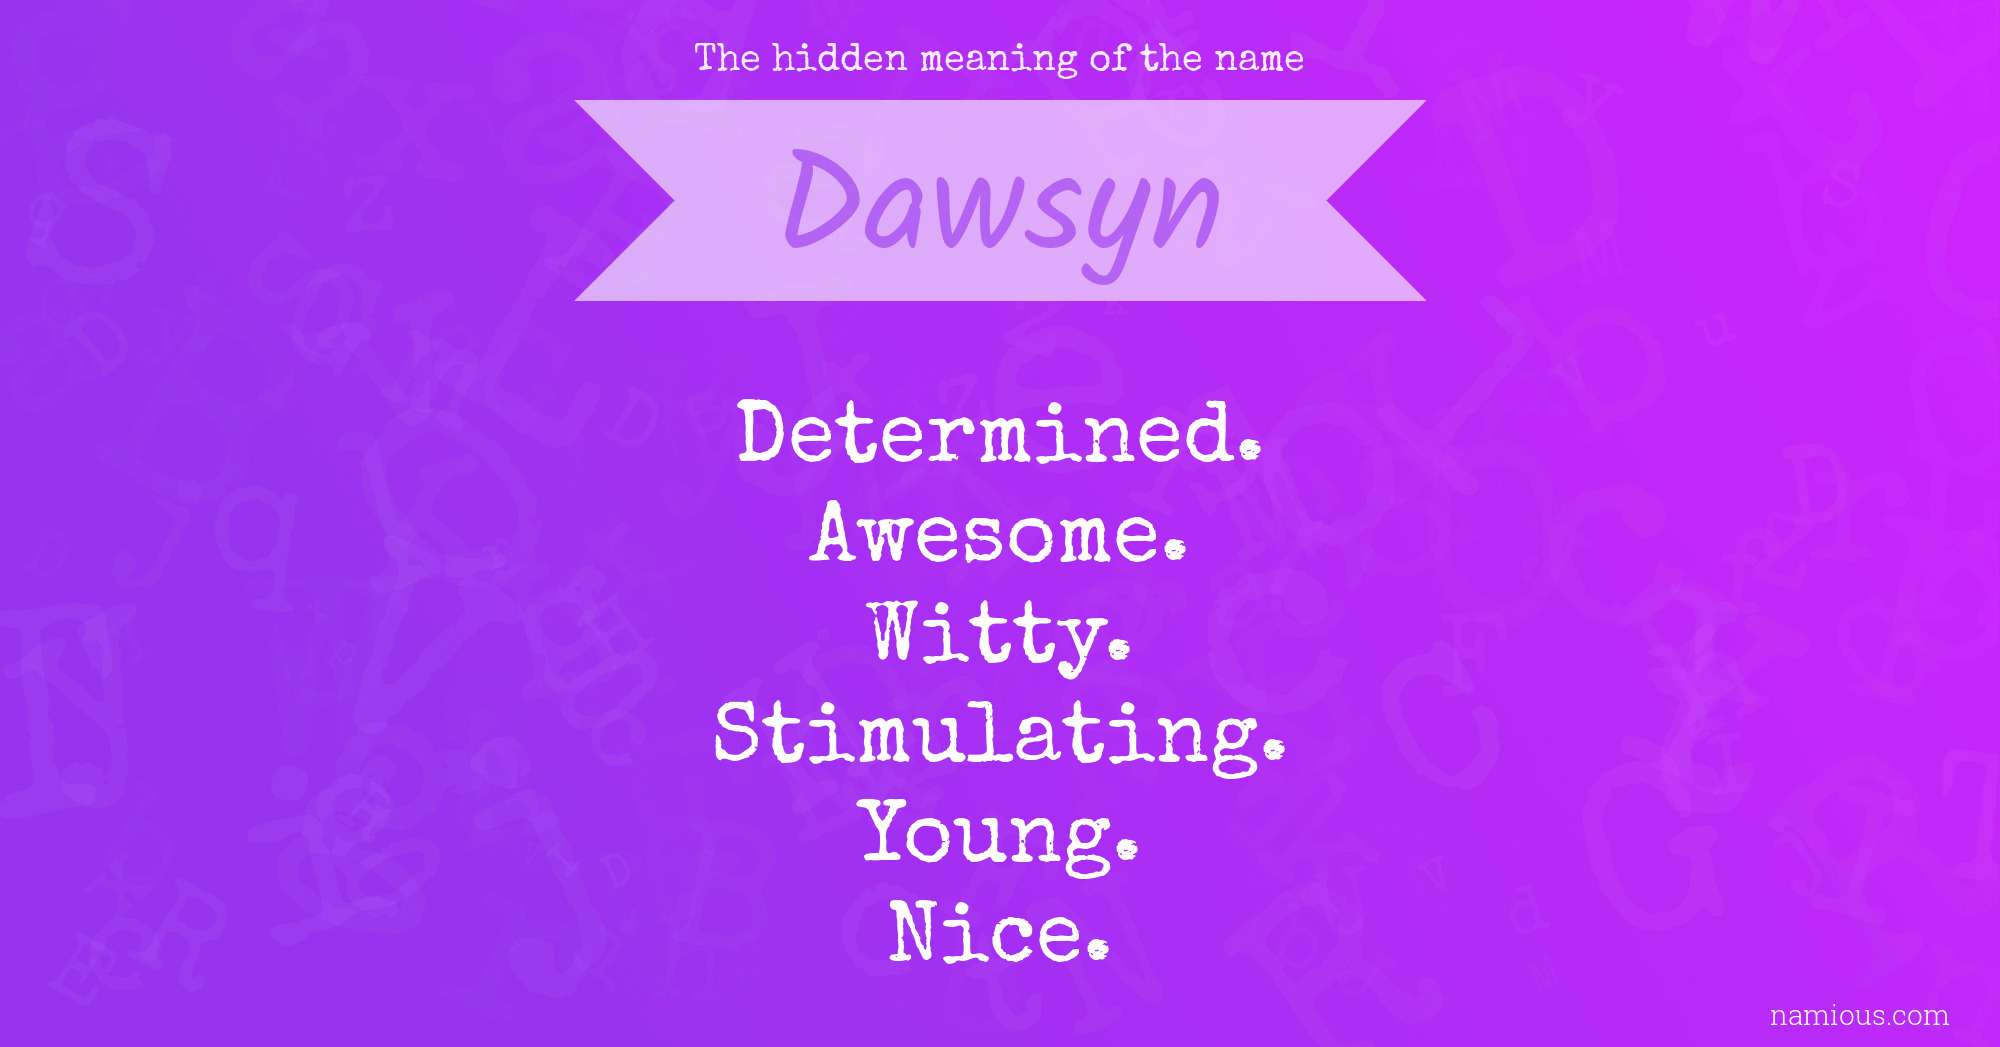 The hidden meaning of the name Dawsyn